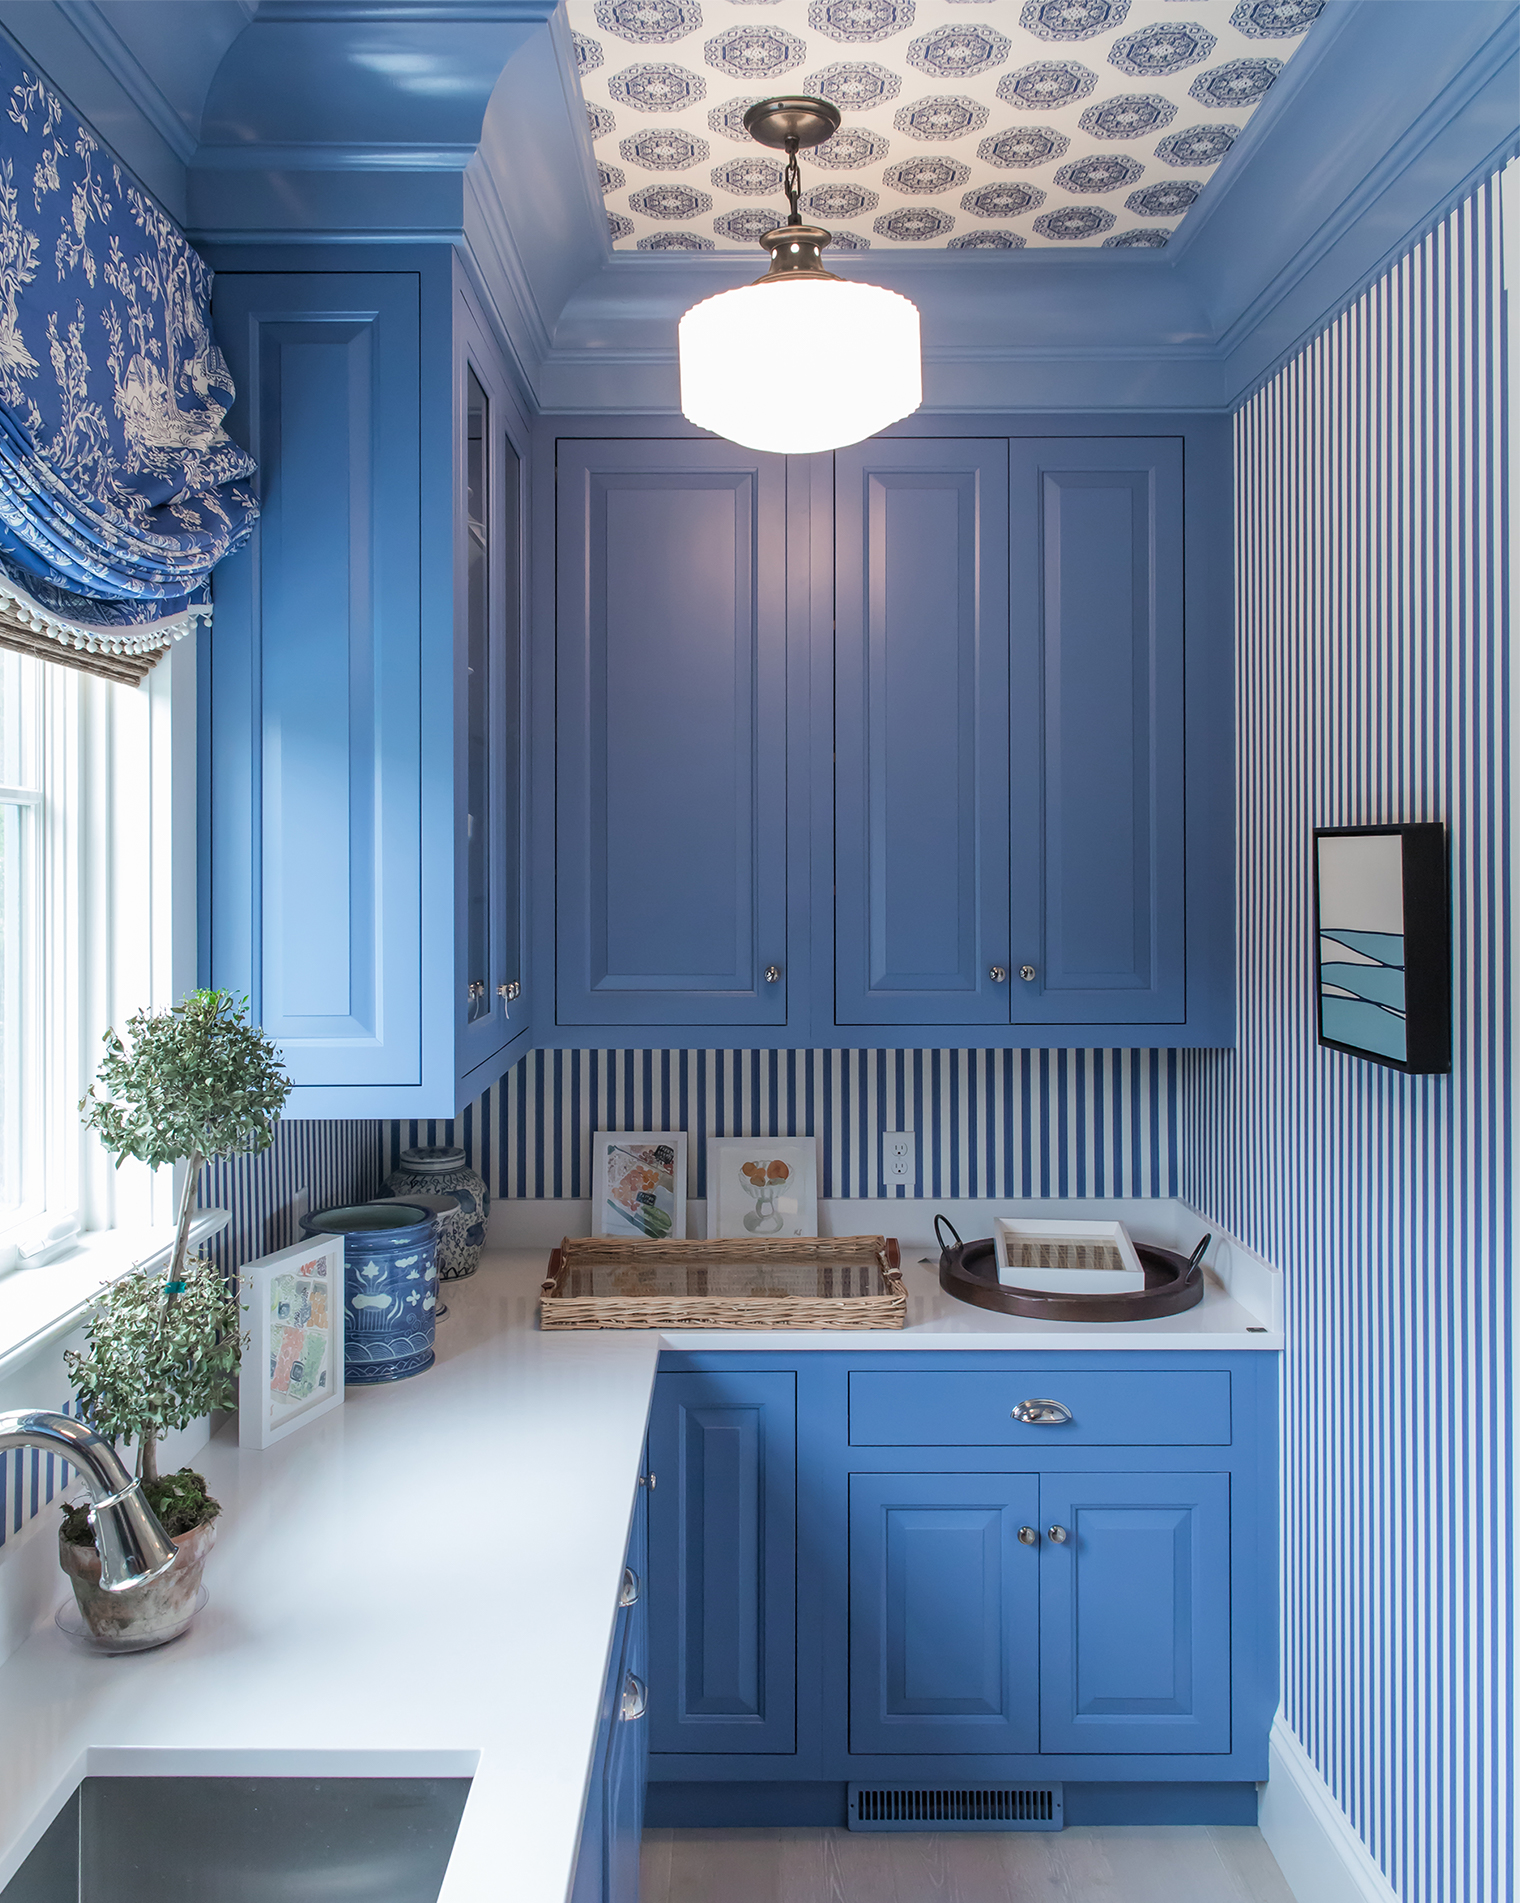 Decorating with blue and white